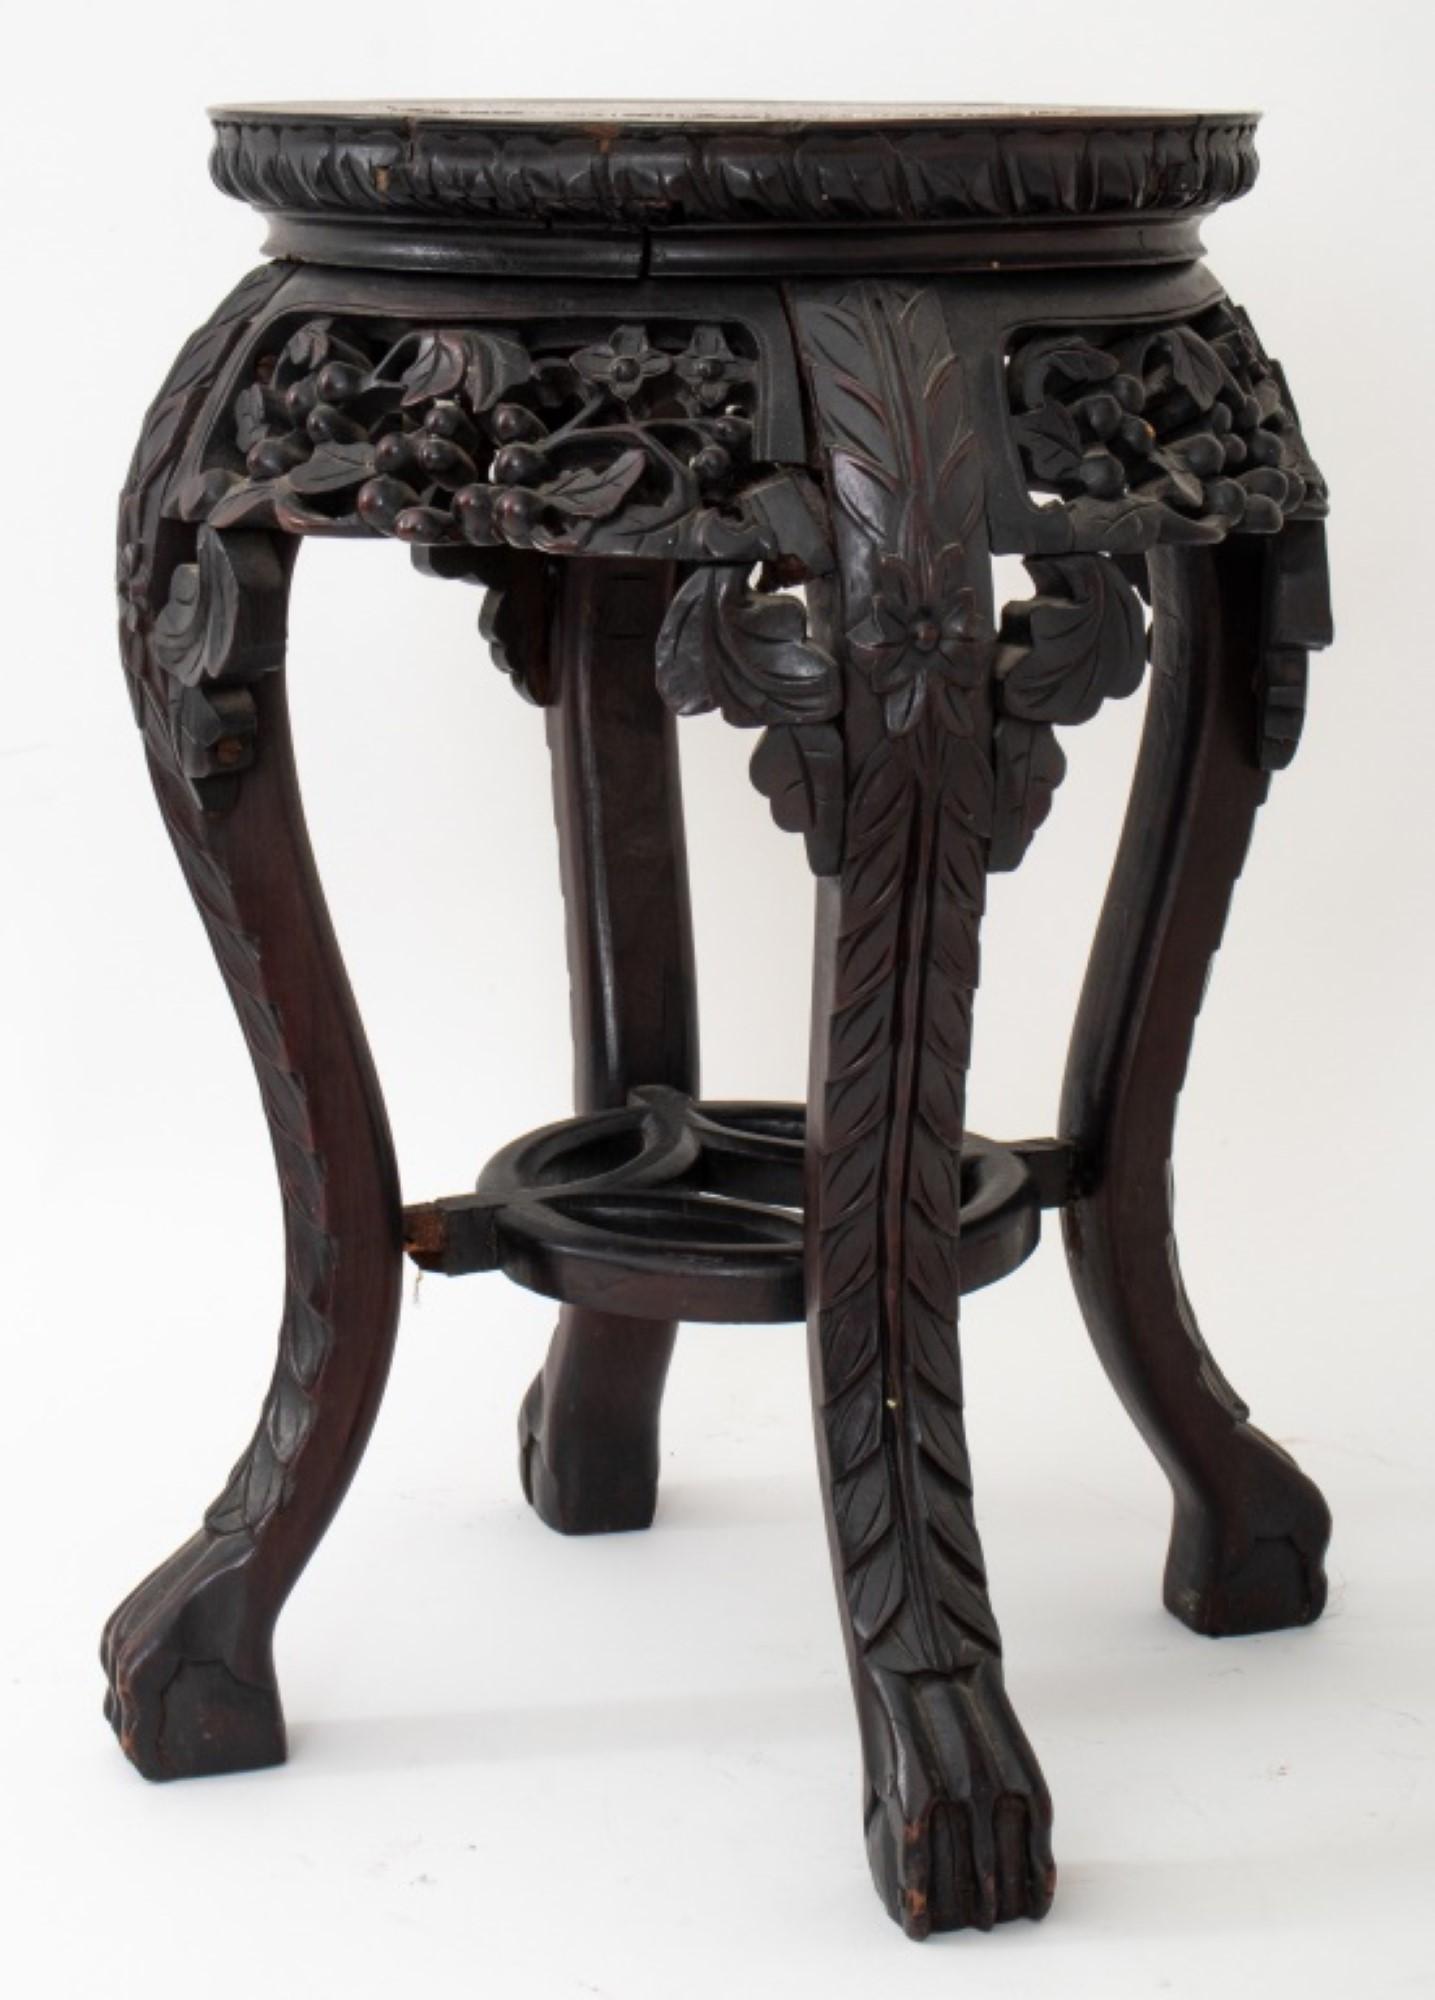 The dimensions for the Chinese marble-mounted carved wooden side table are approximately:

Dealer: S138XX